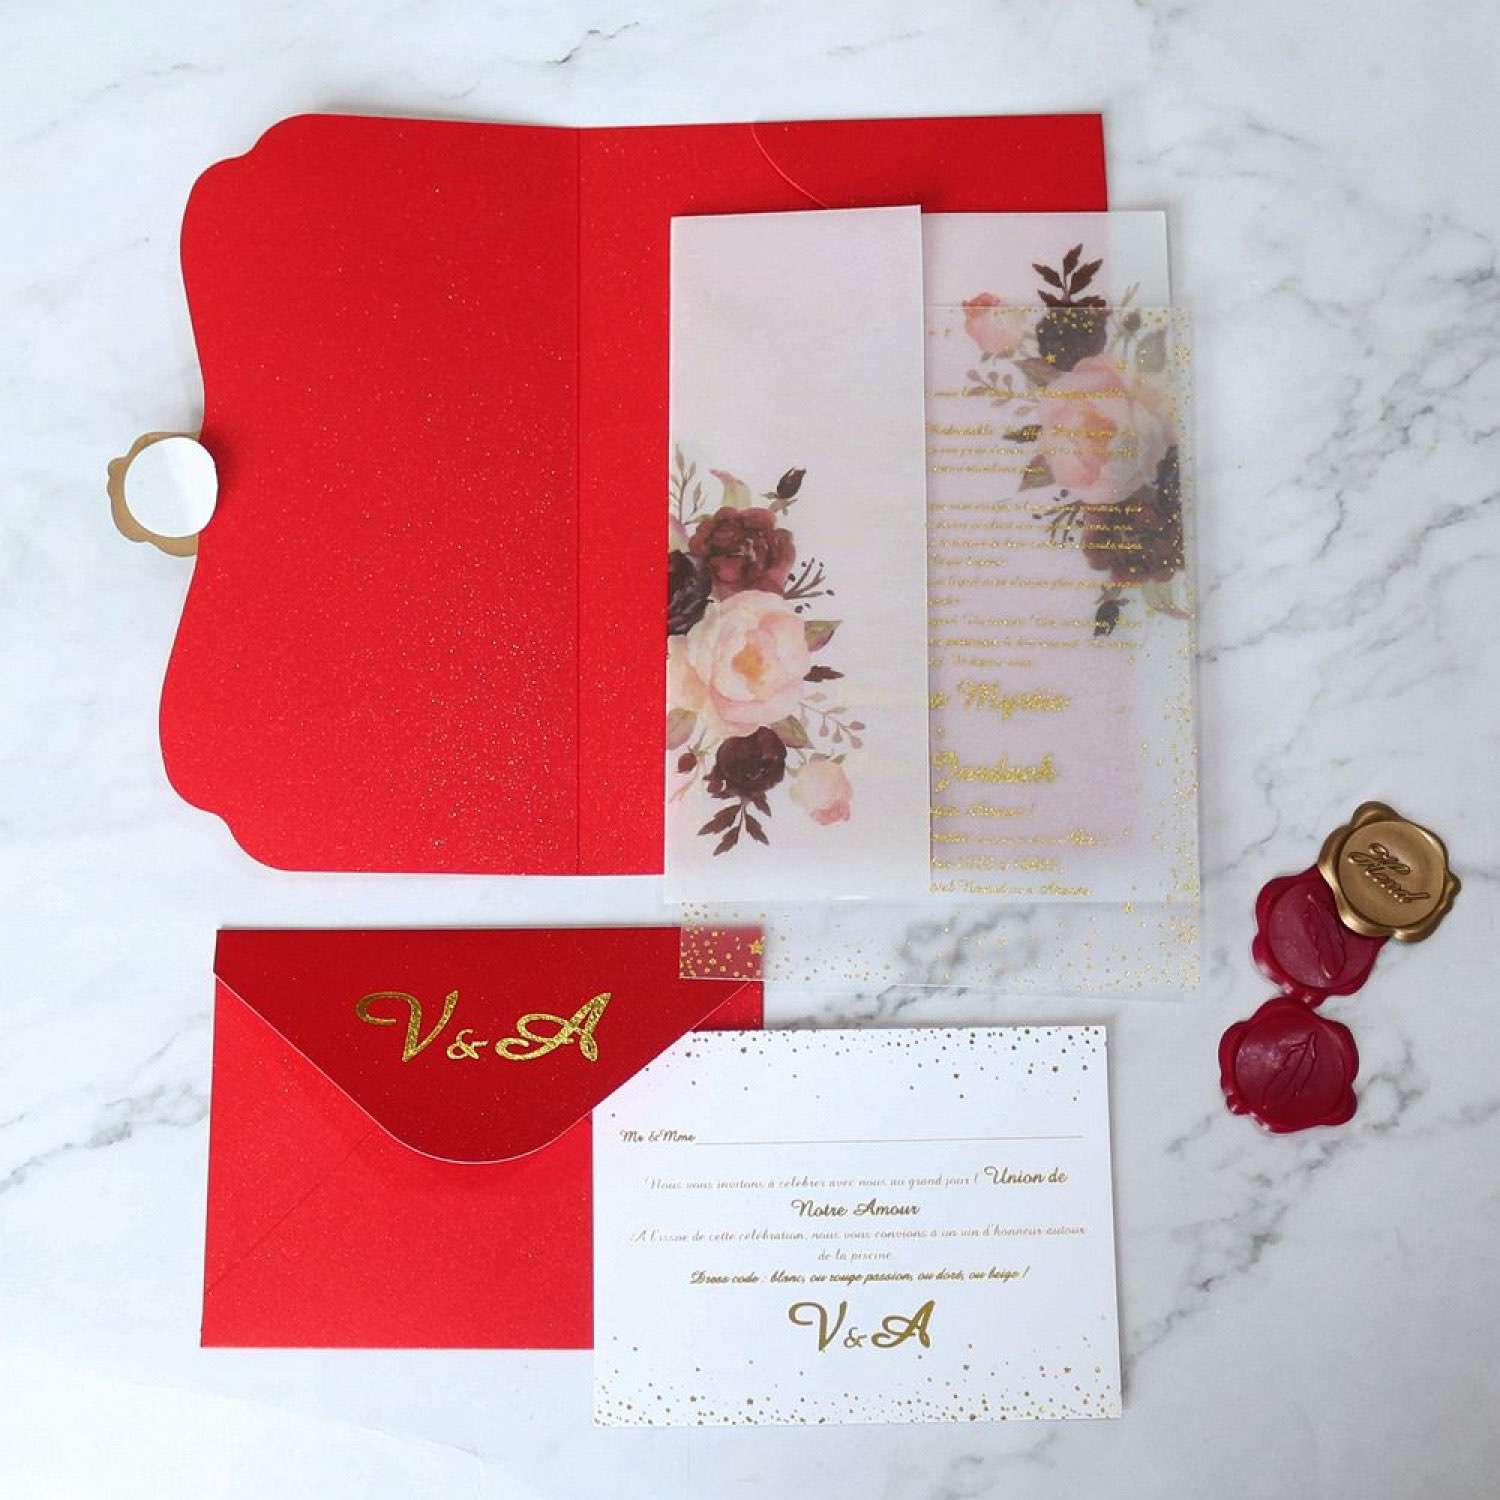 Frosted Acrylic Invitation Card with Vellum Paper Cover Foiling Red Envelope 